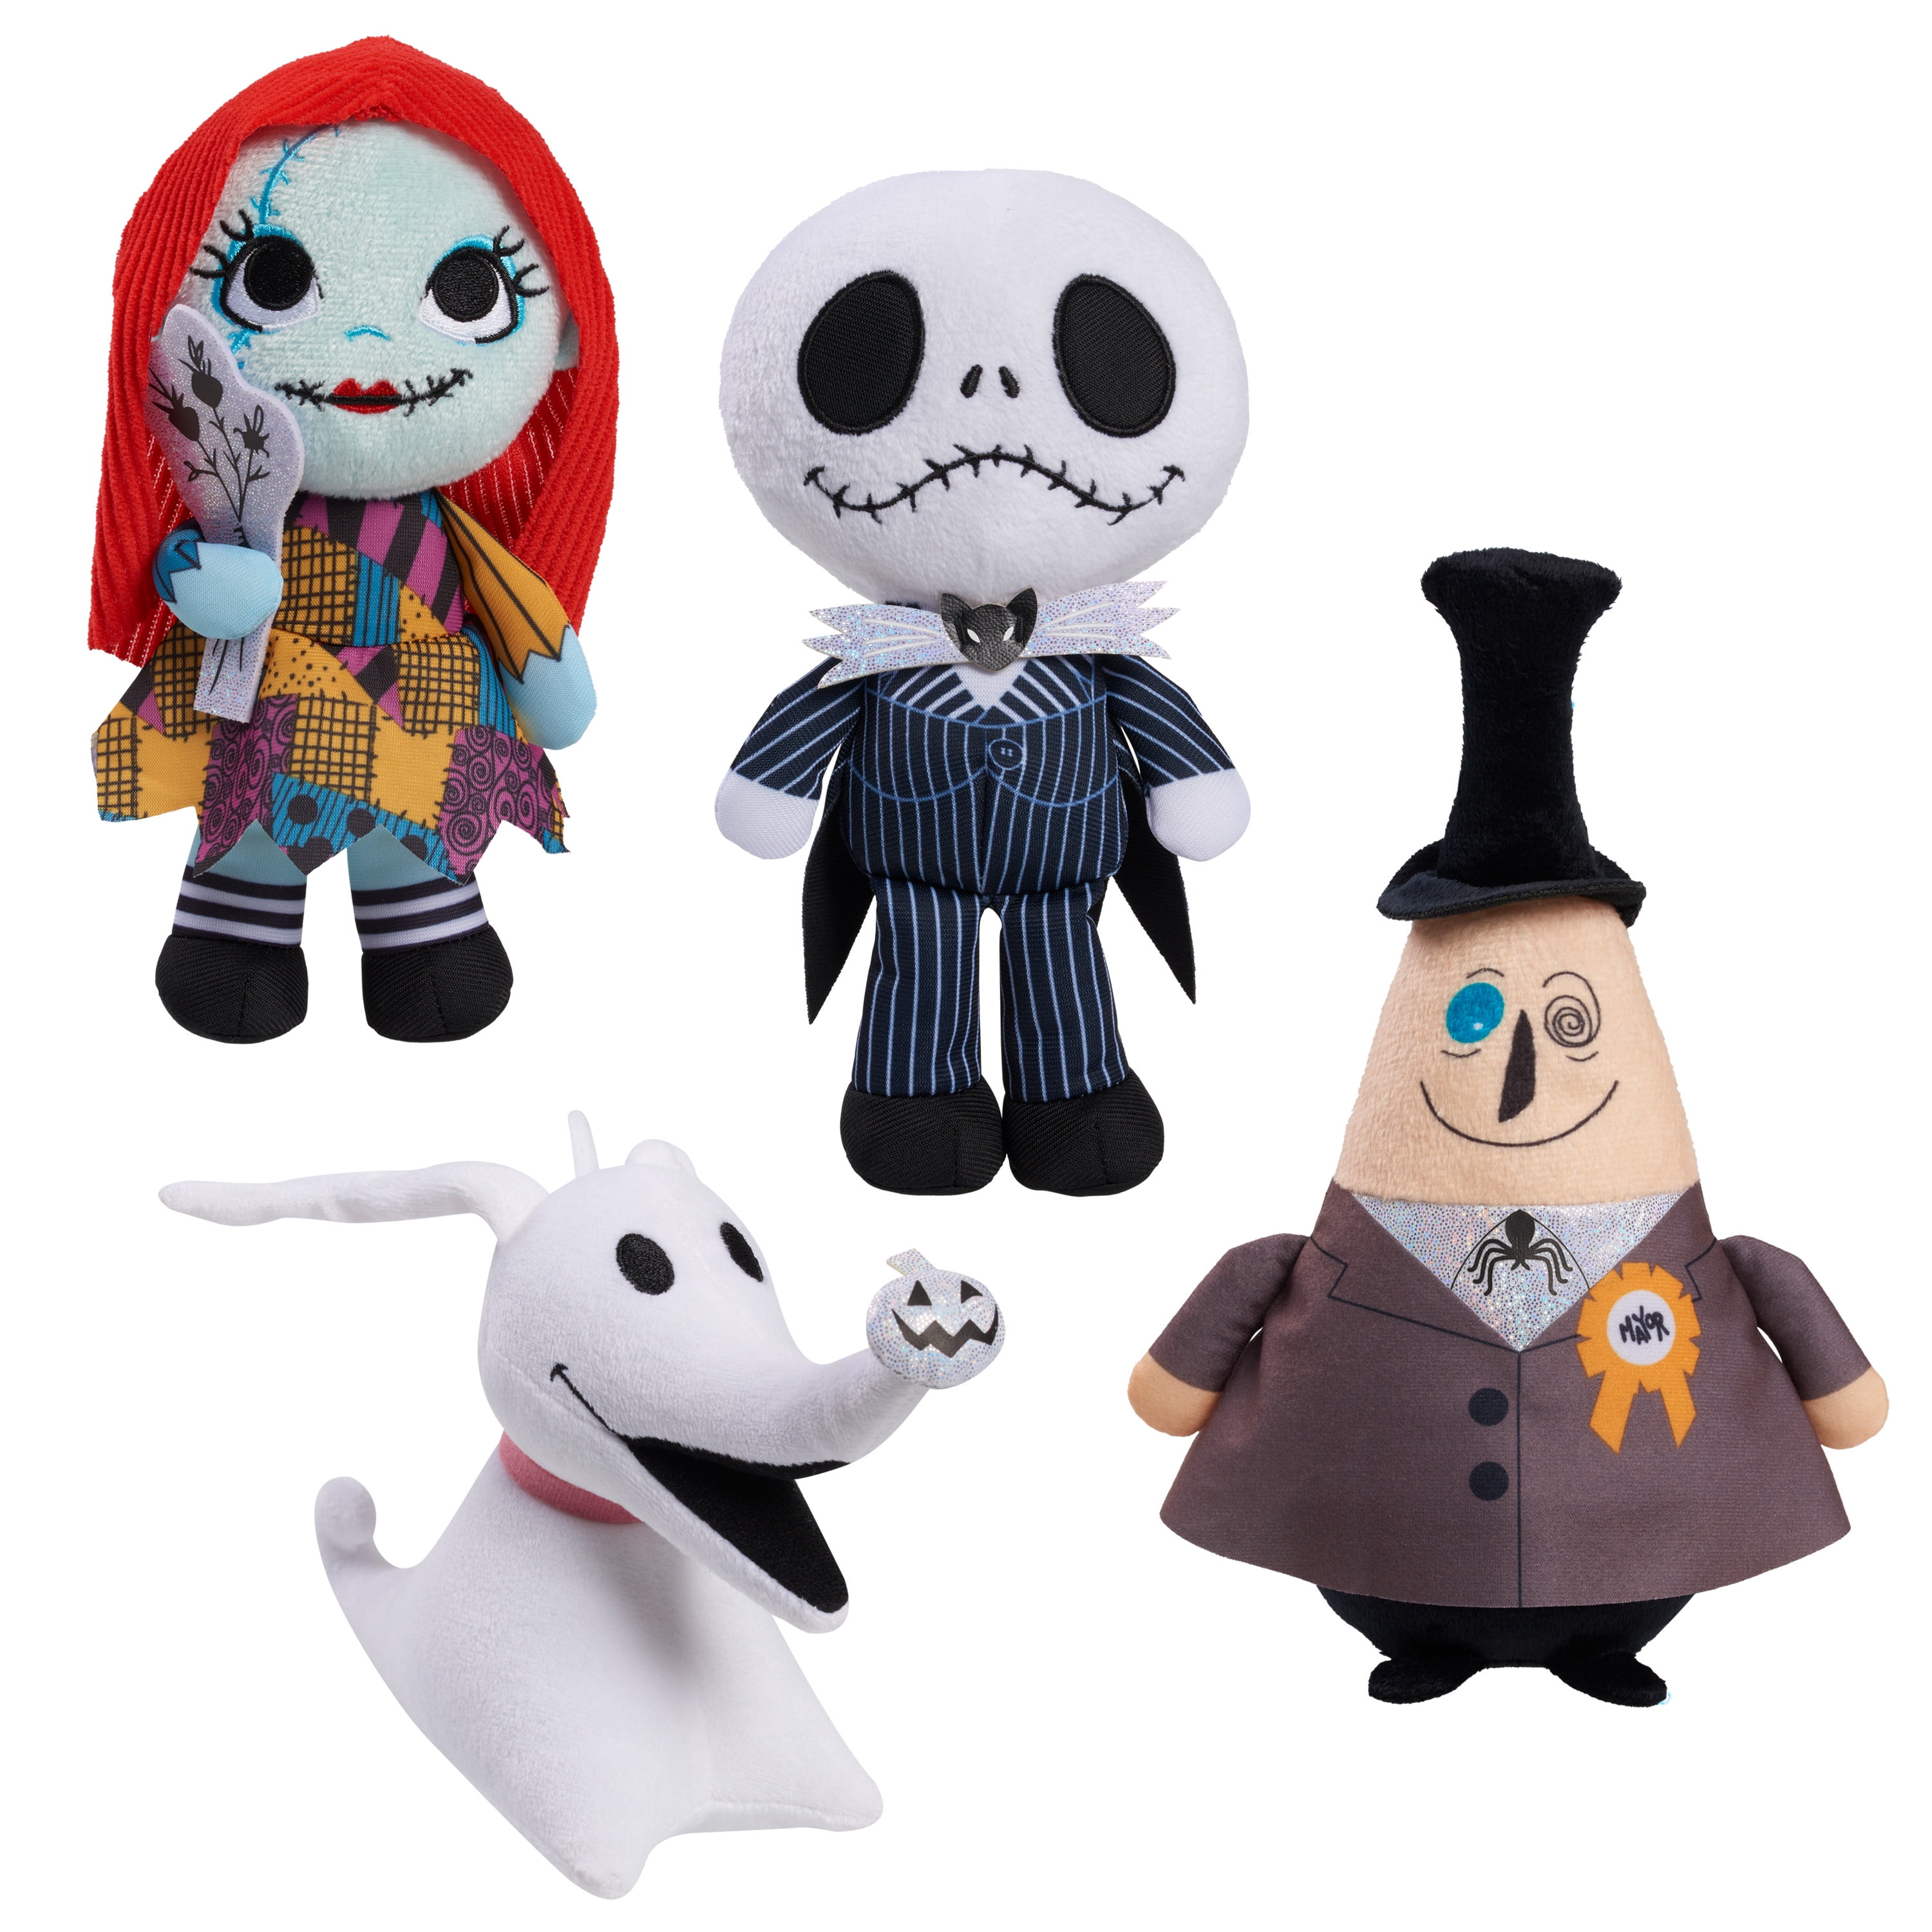 up Christmas 3 Disney100 for Kids Plush Before The Collector Toys Set, 4-piece Ages Disney Nightmare Burton\'s Tim